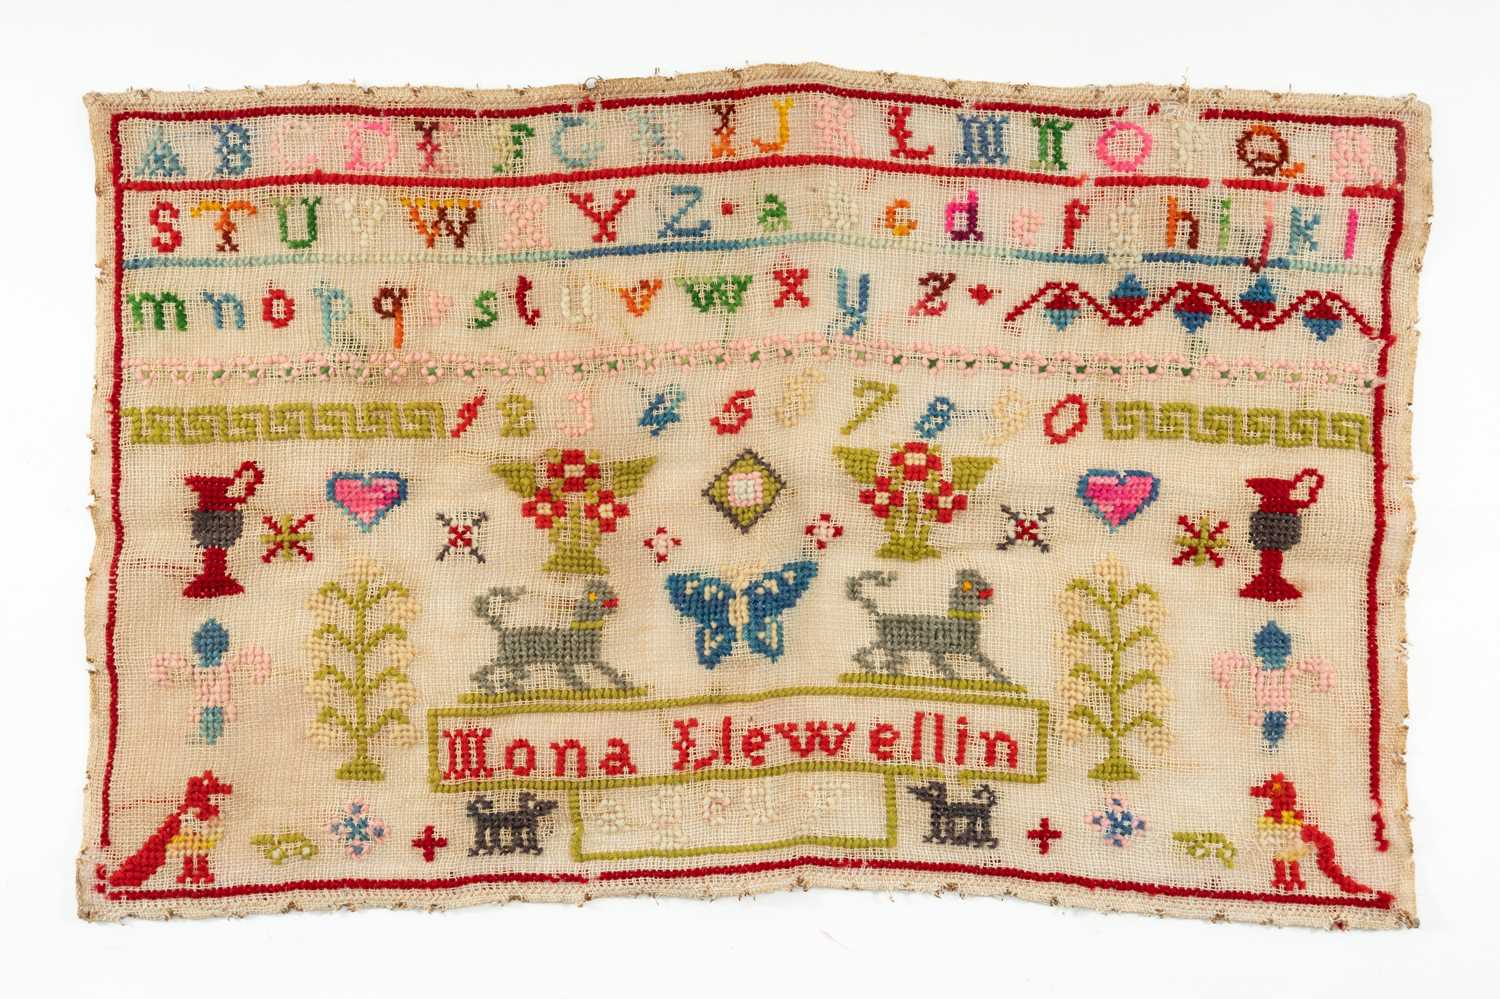 ‡ WELSH EMBROIDERED SAMPLER circa 1890s, alphabetical, numerical and pictorial, worked by Mona